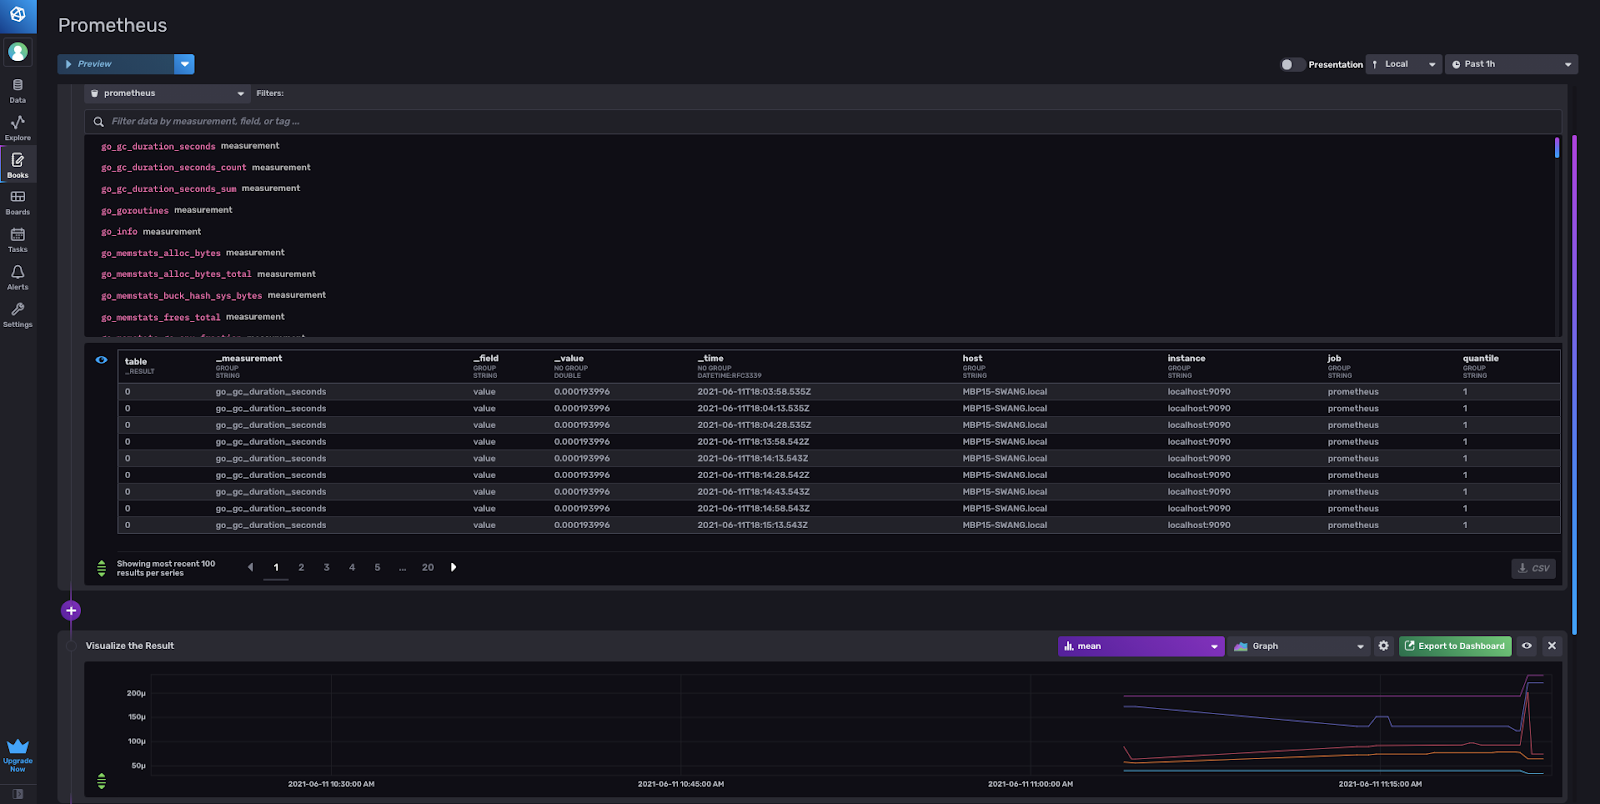 View of the 1.x schema of Prometheus remote write metrics as an InfluxDB Notebook